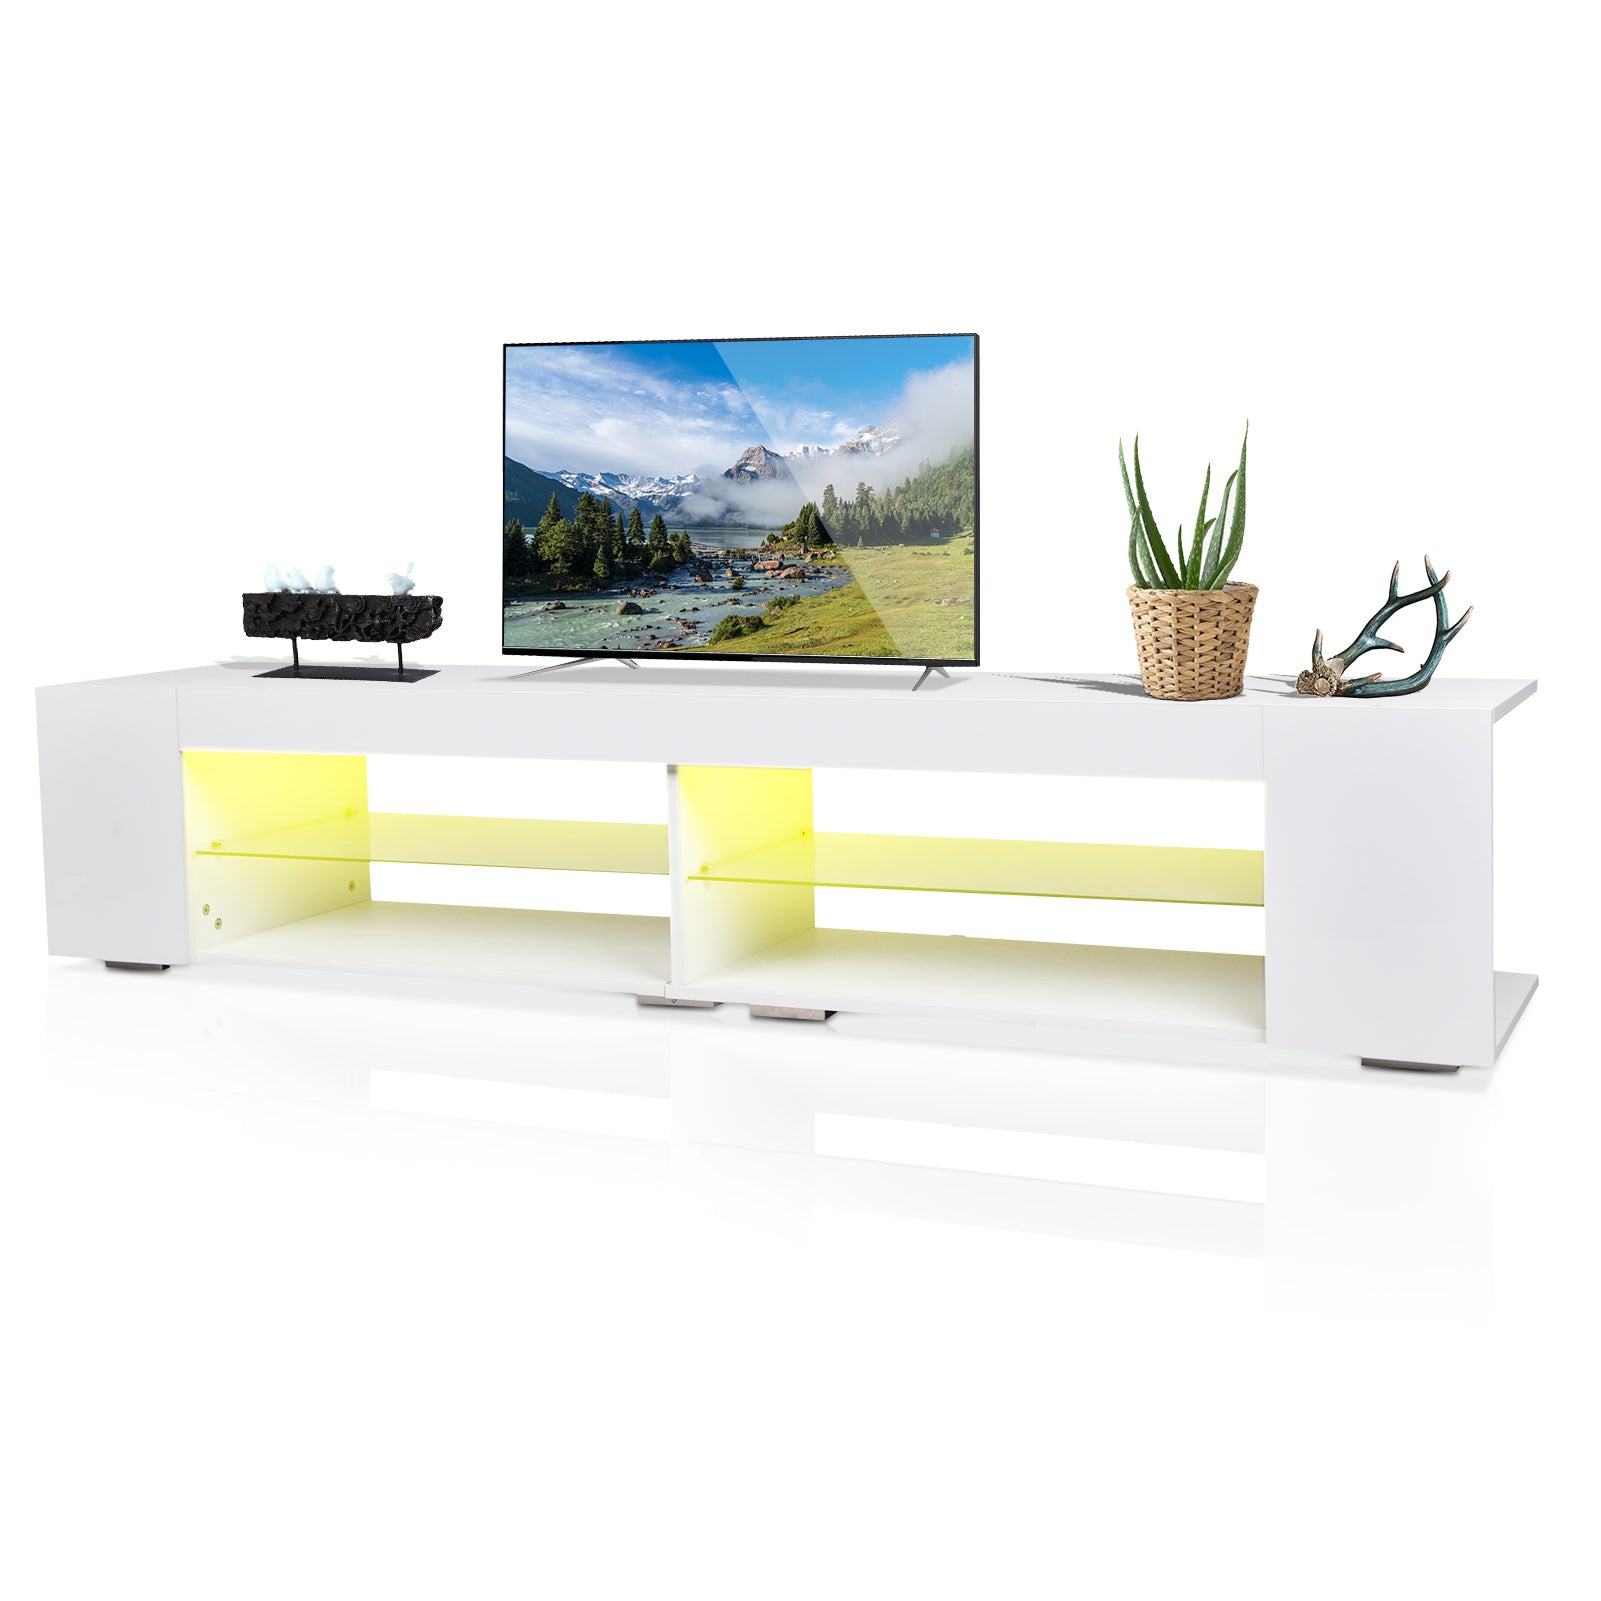 Modern High Gloss LED Entertainment Center, TV Stand with Storage